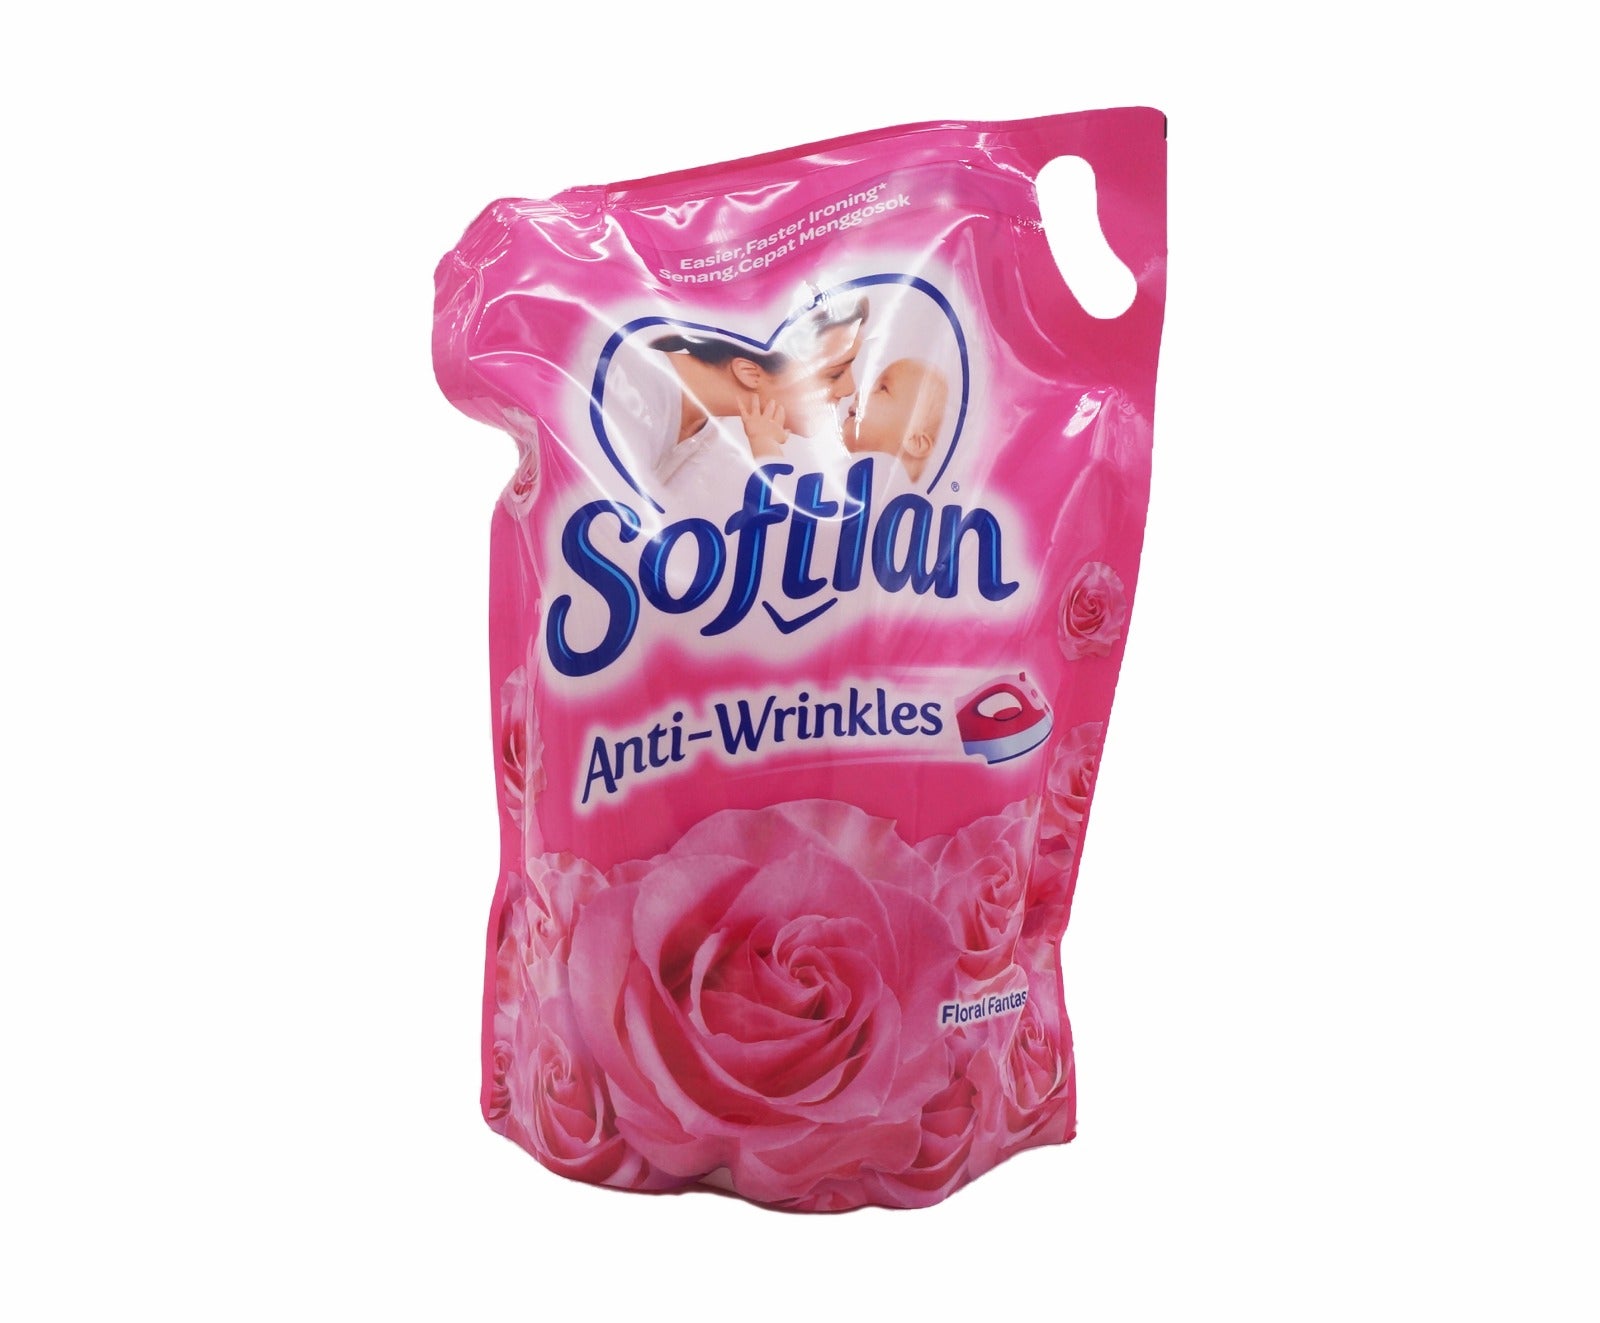 Softlan Anti-Wrinkles Fabric Conditioner Refill Pack - Floral Fantasy (1.4L – Piece)